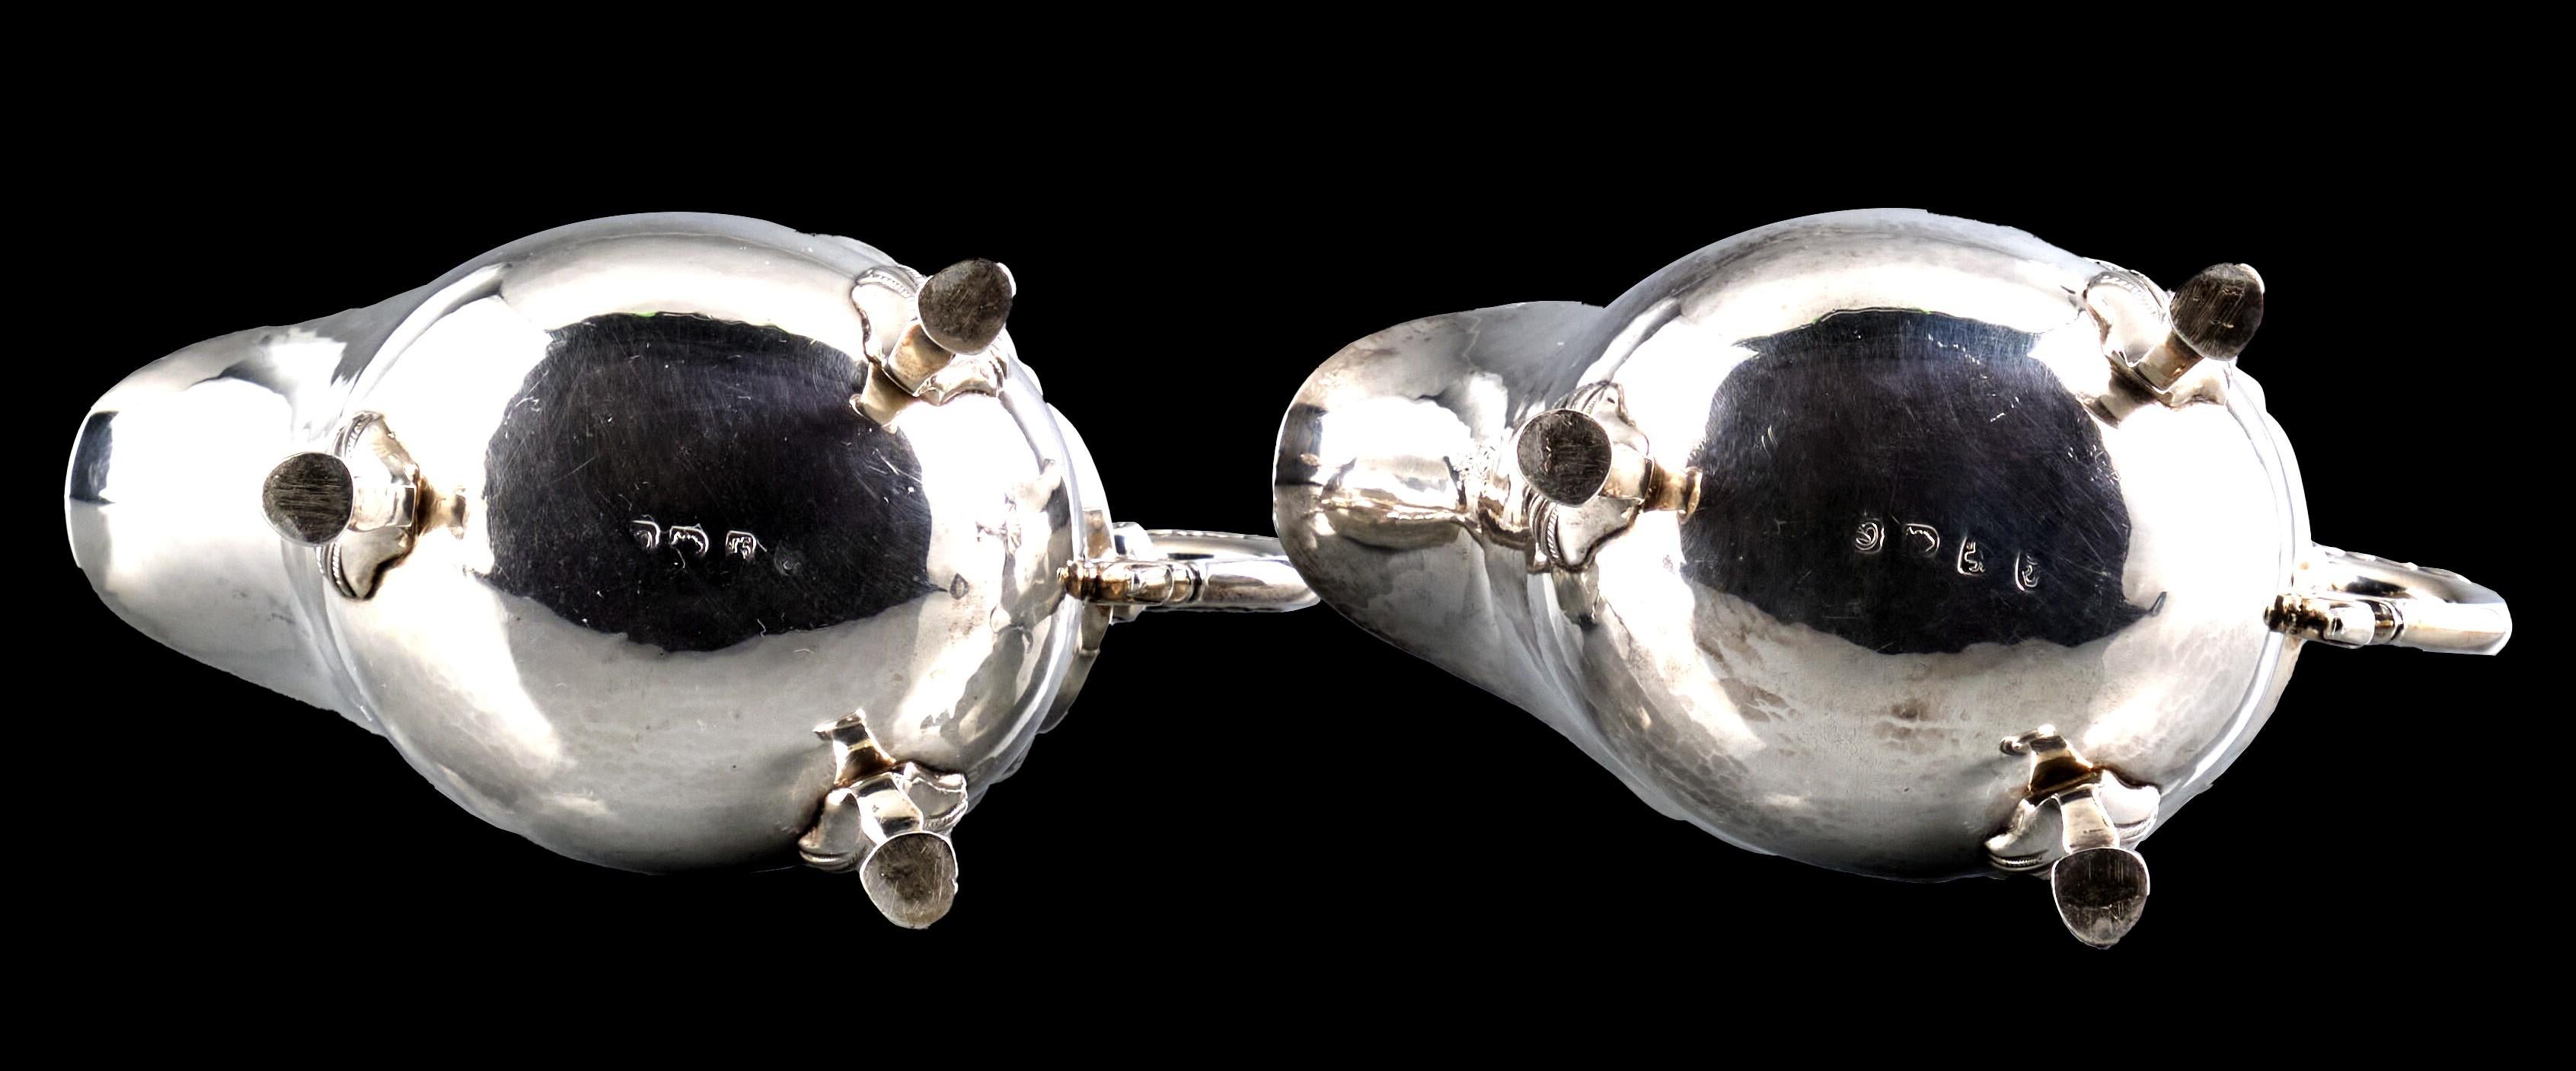 Fine Pair of Mid 18th Century Georgian Sterling Silver Sauce Boats, London 1762 For Sale 1